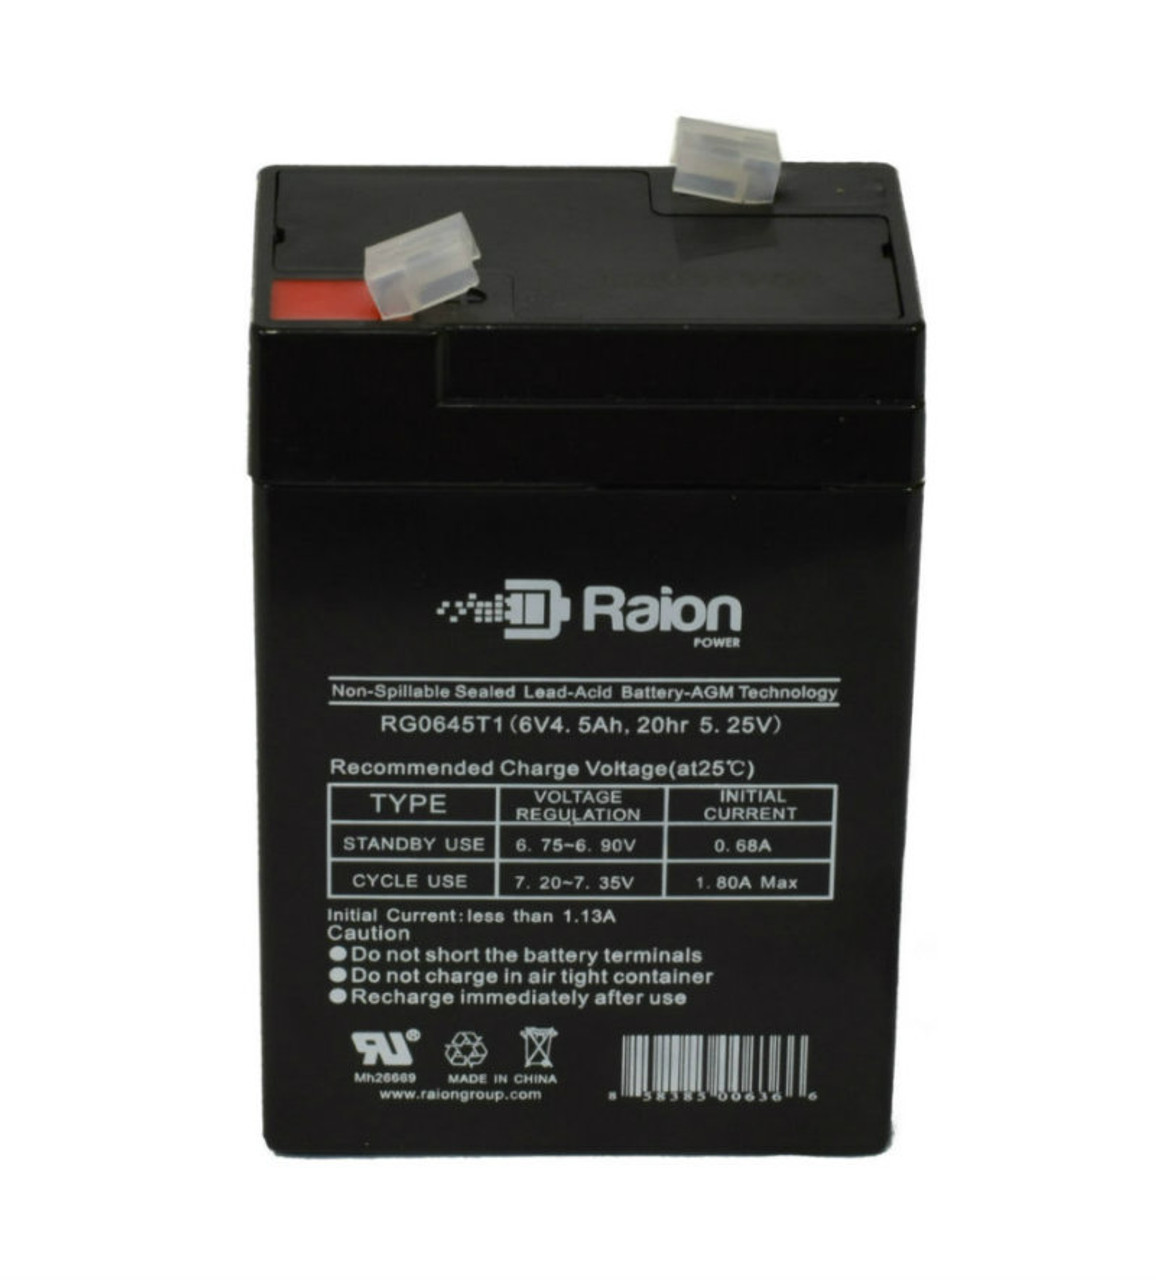 Raion Power RG0645T1 Replacement Battery Cartridge for Starlight 6FM4.5